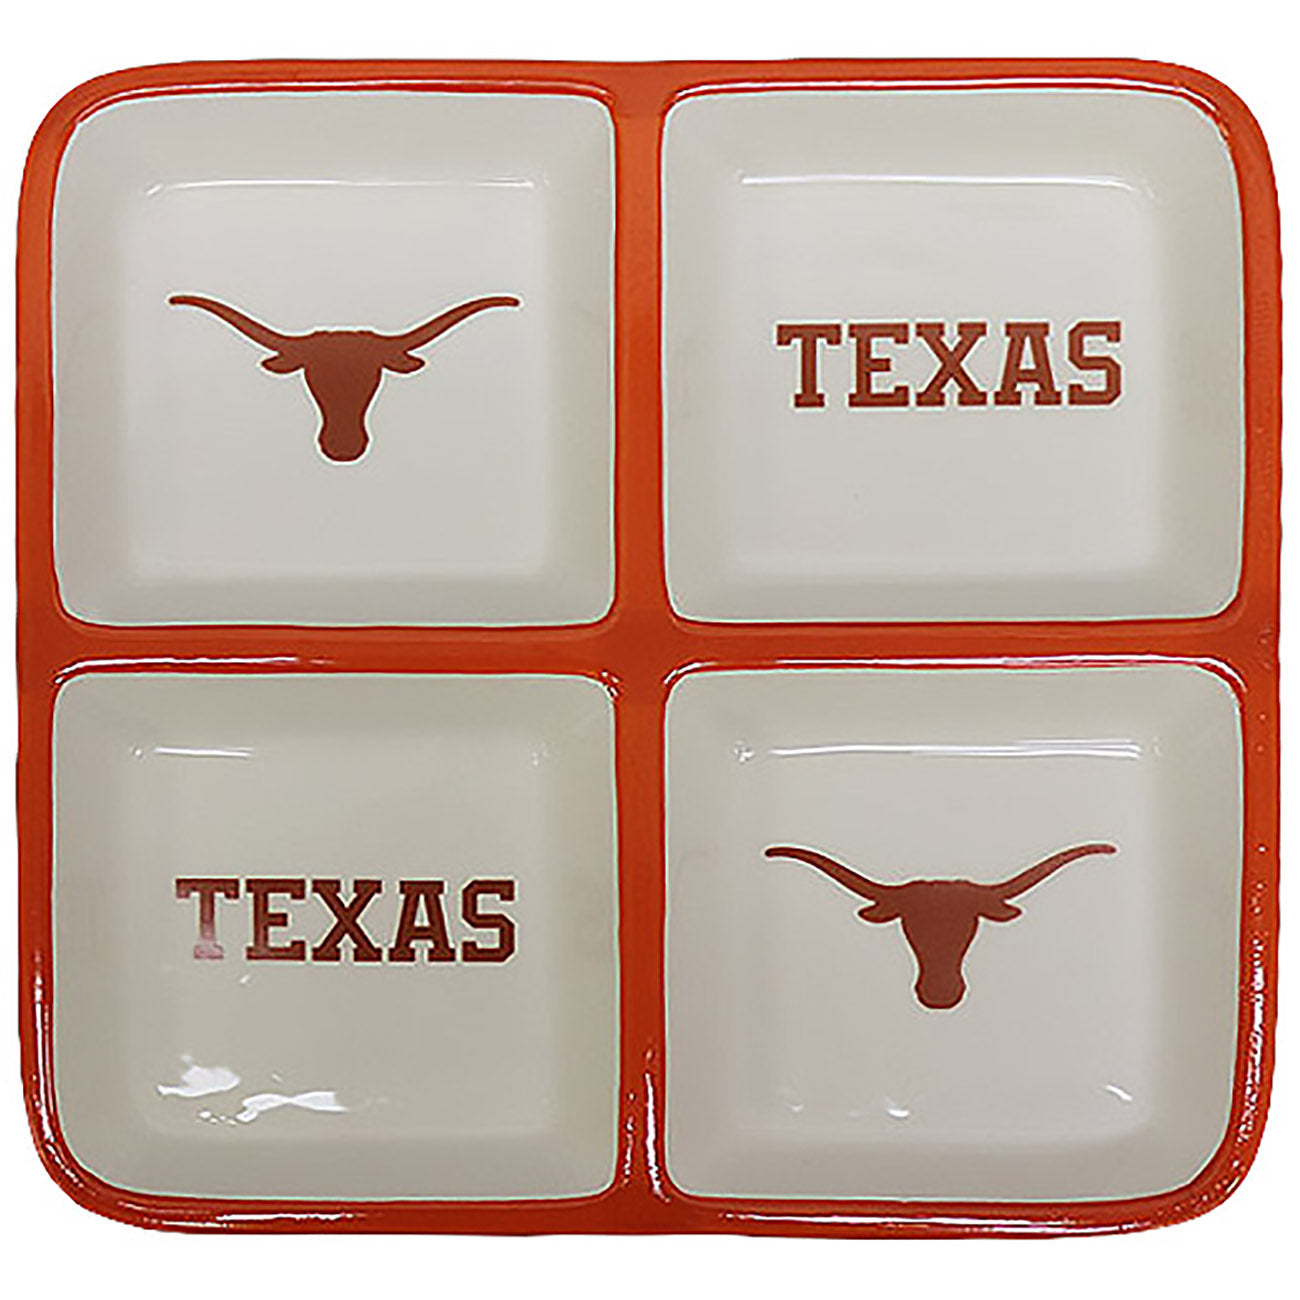 4 Section Square Tray | Texas at Austin